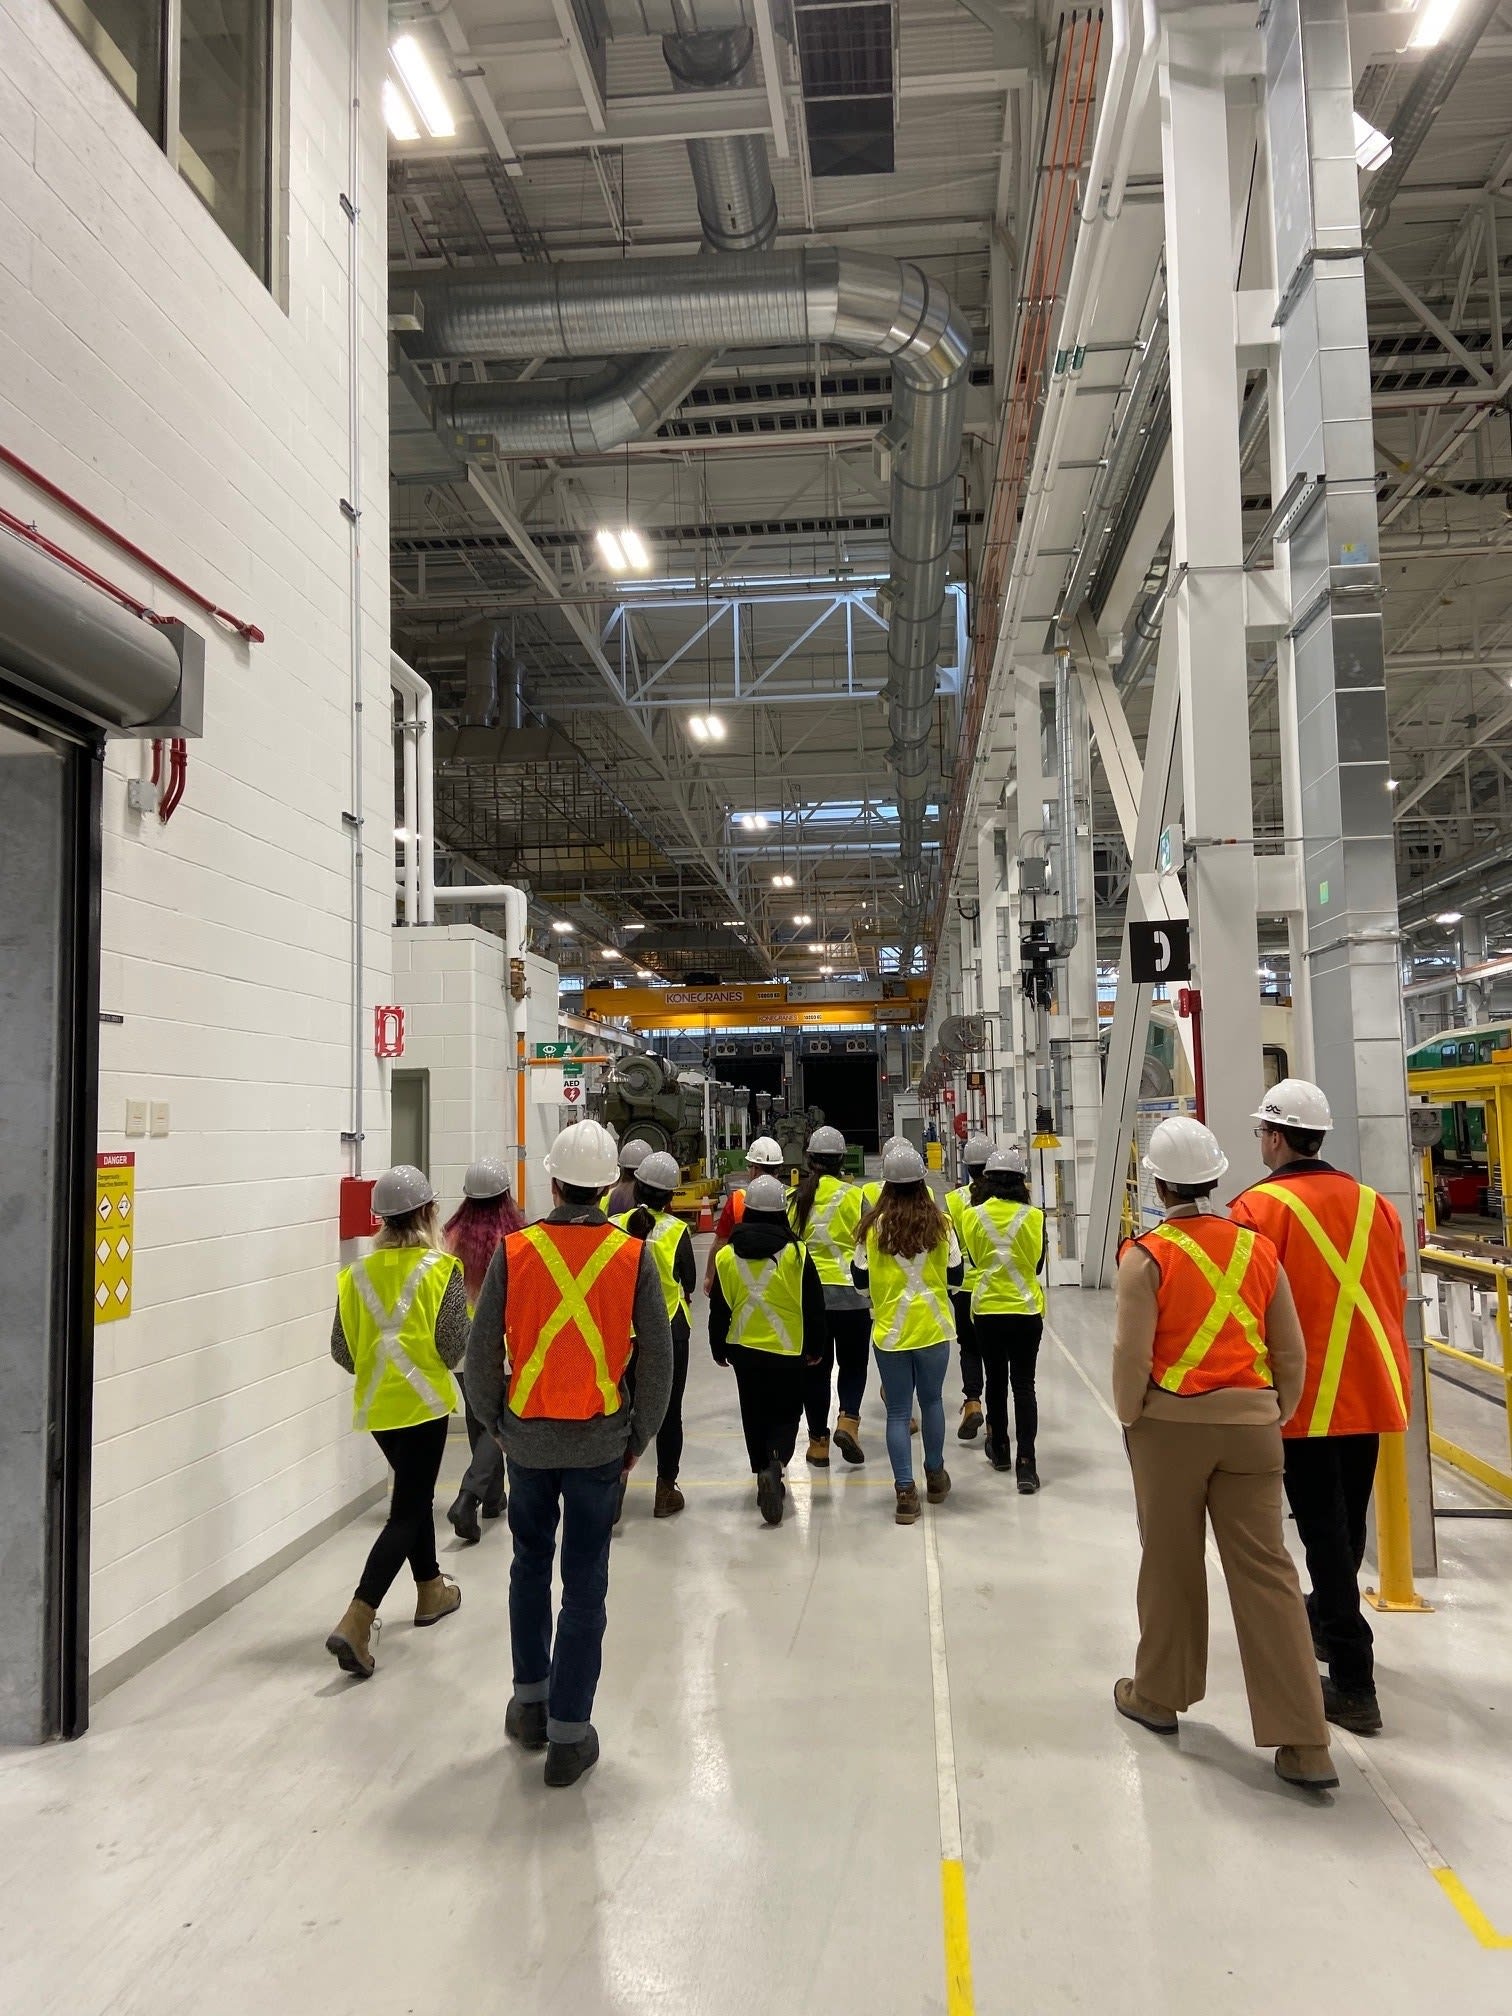 A group walks through the inside of a large maintenance facility.